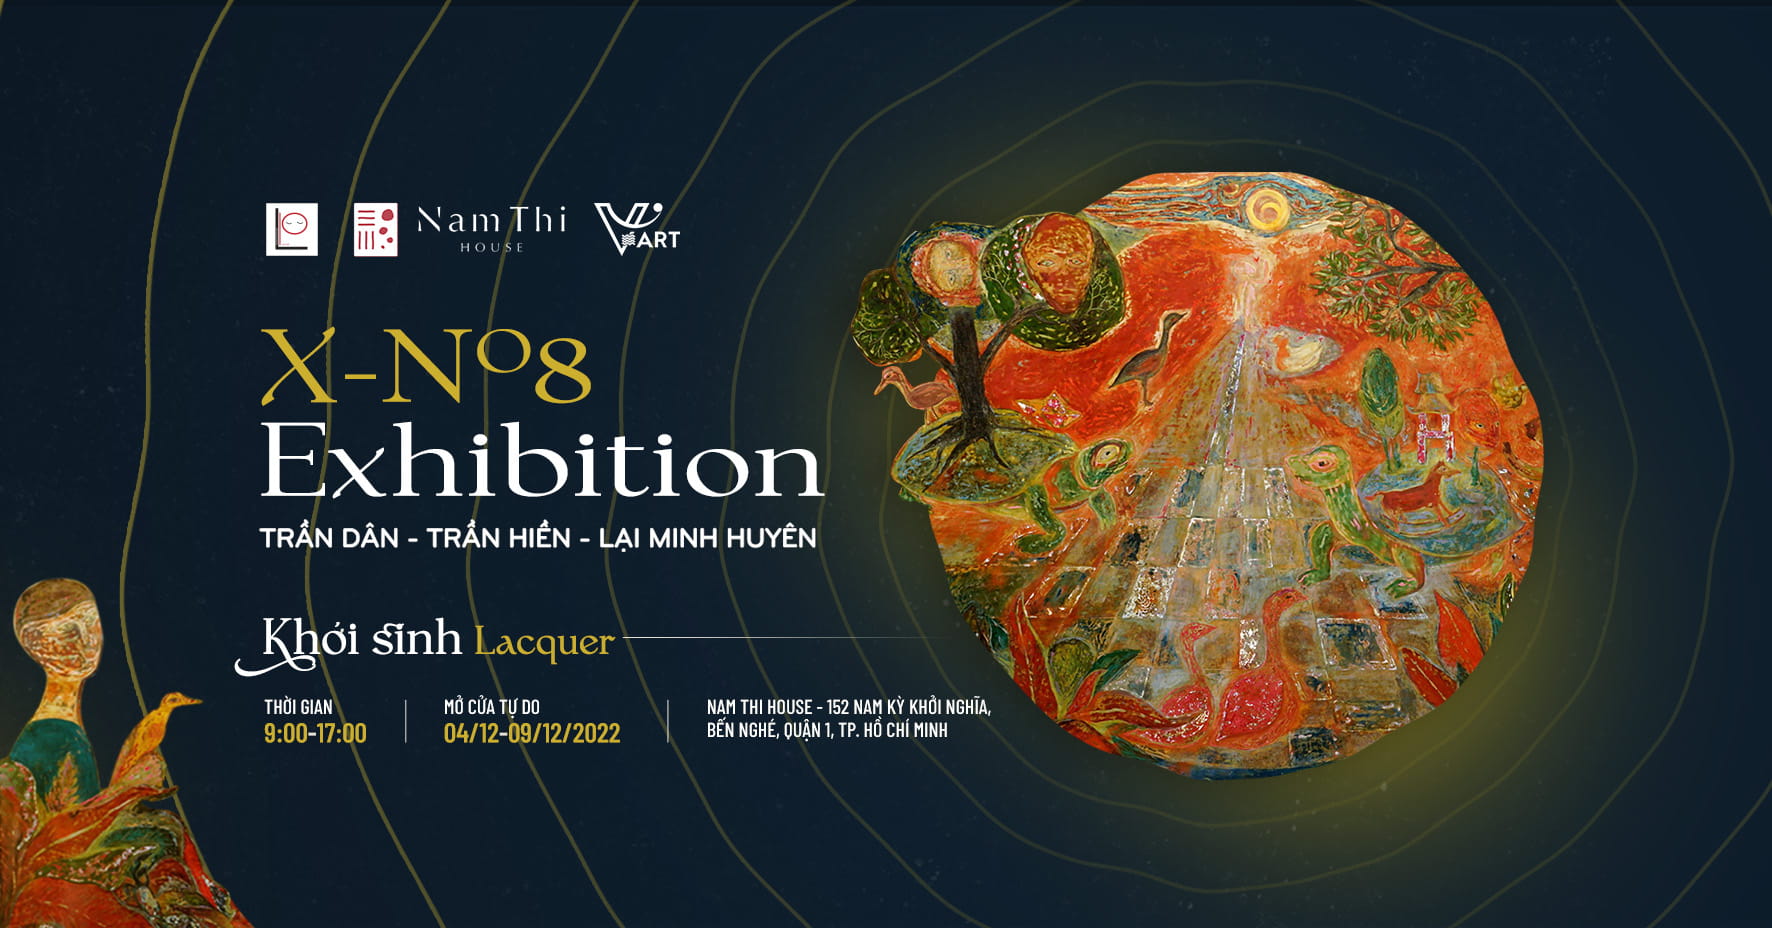 X-No8 Exhibition & Khởi Sinh Lacquer Collections_Facebook banner